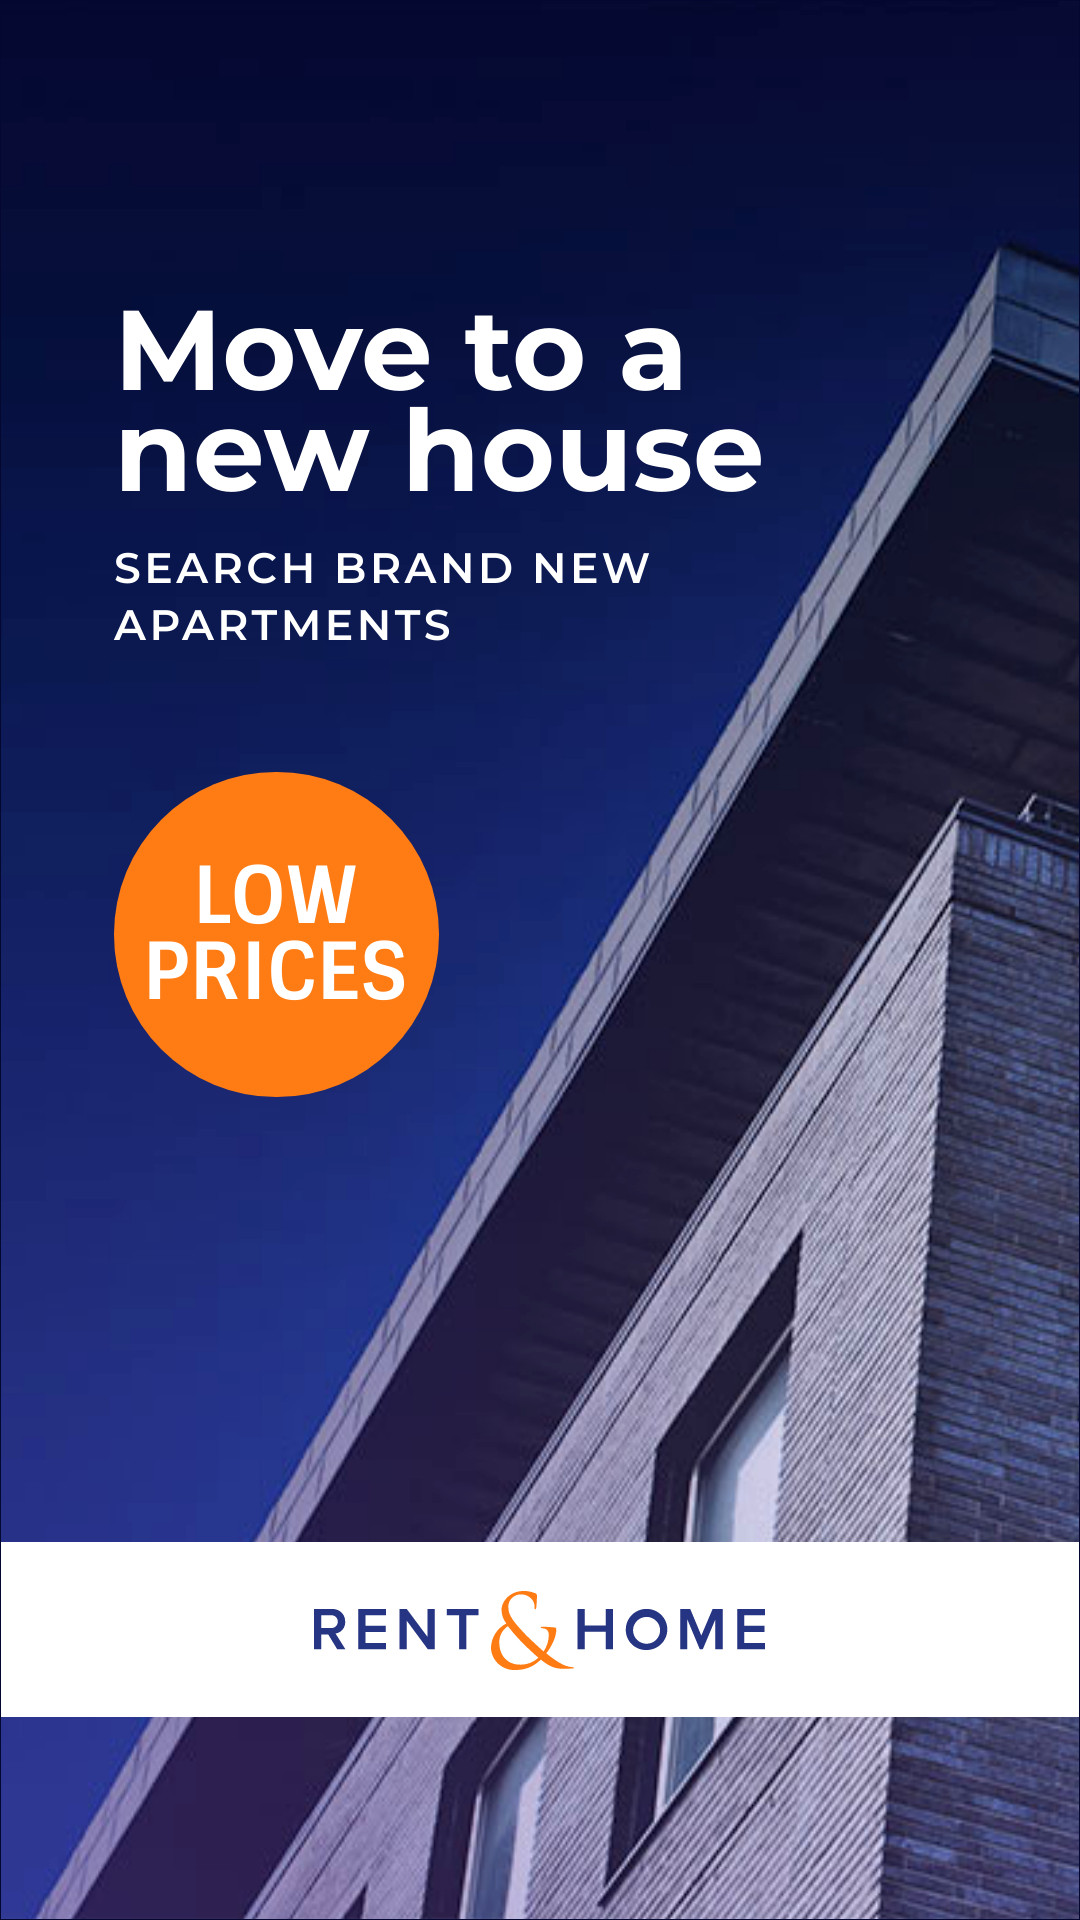 Search Brand New Apartments